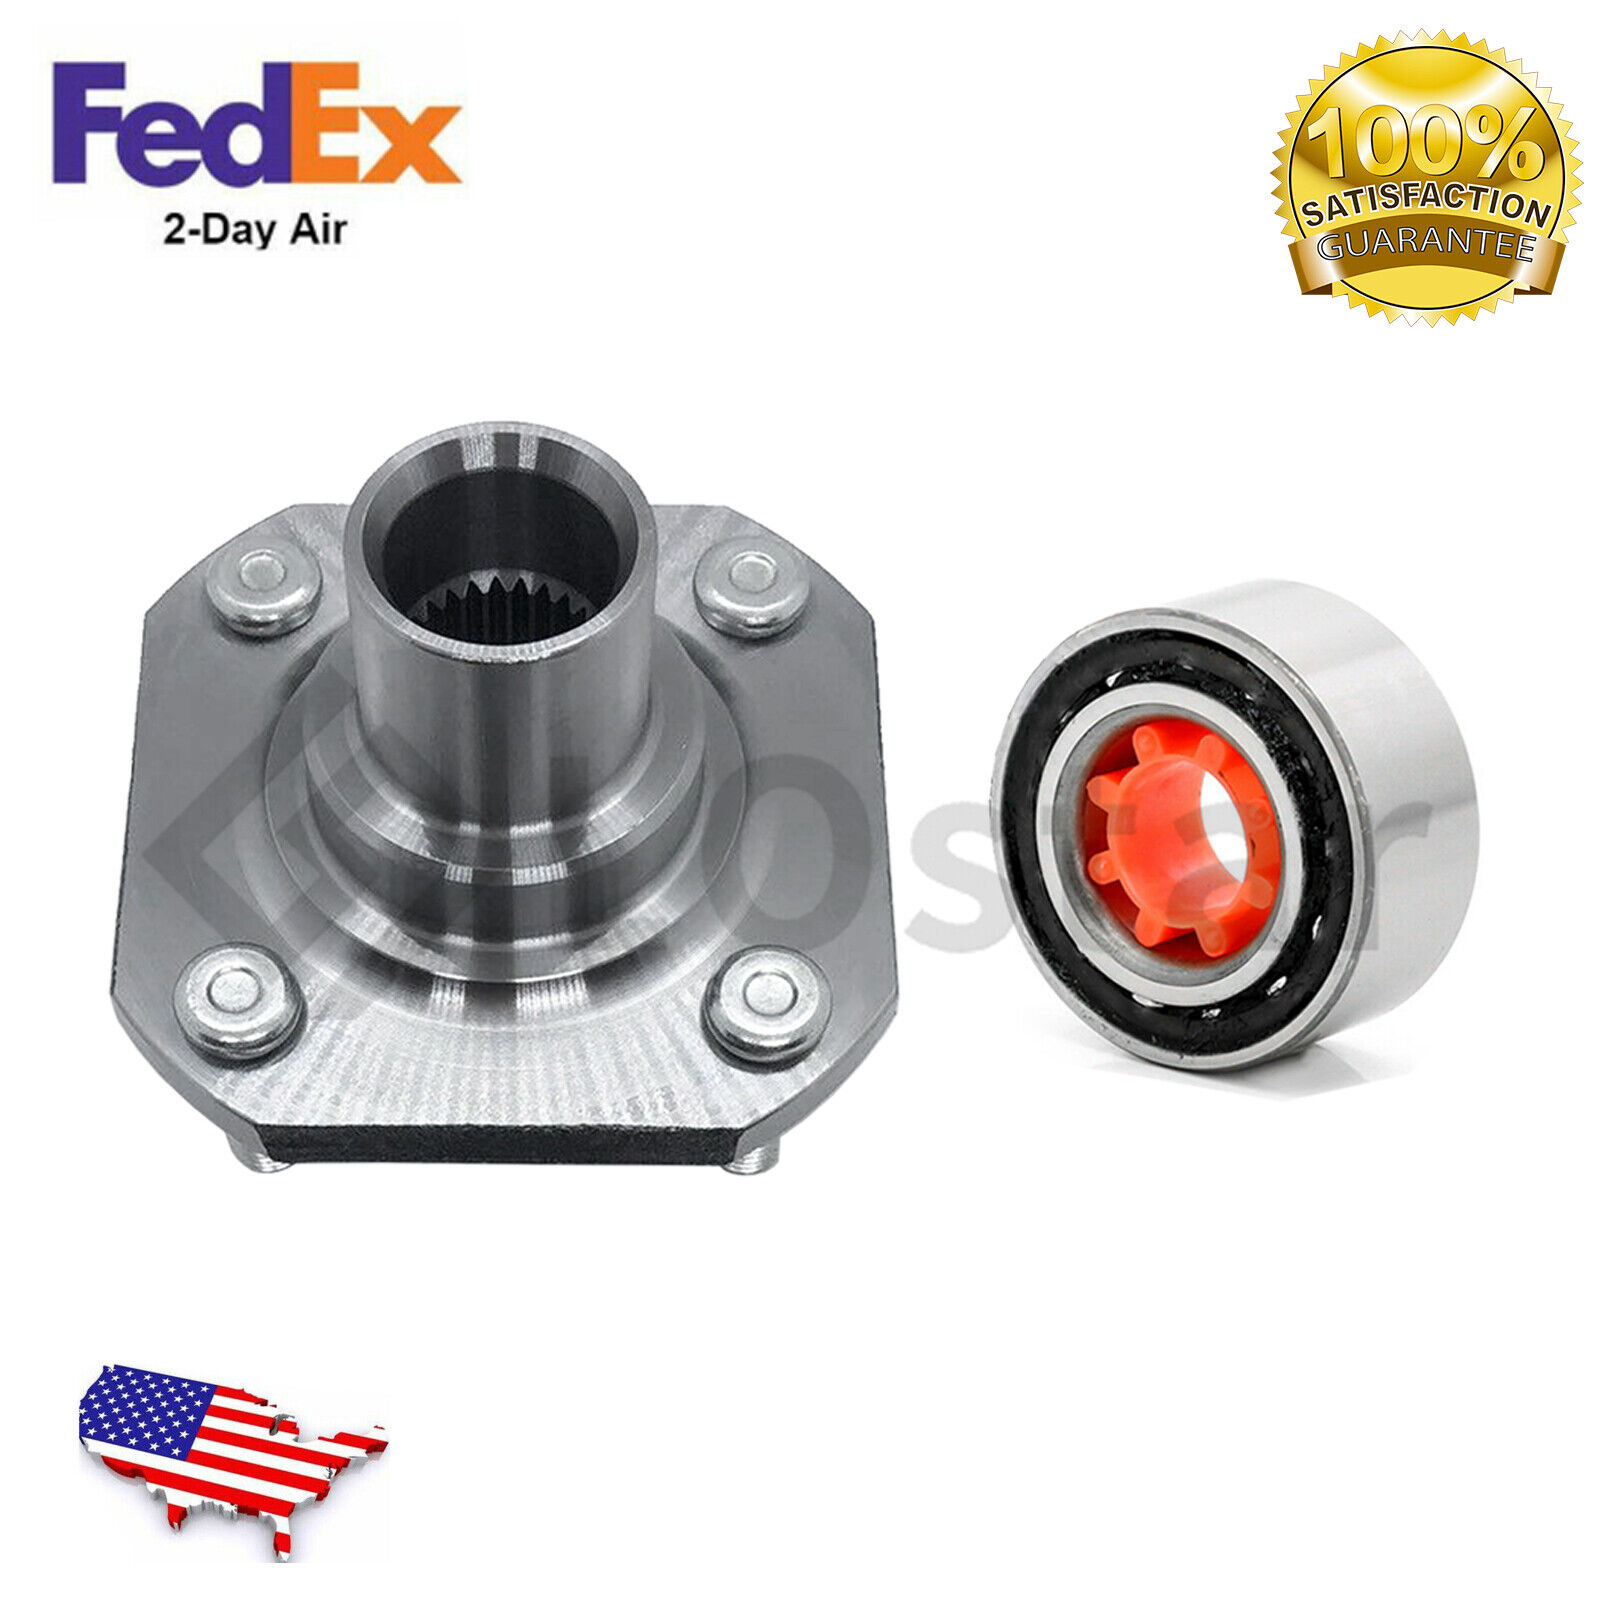 New Front Wheel Hub & Bearing Assembly Fits Toyota Tercel Paseo